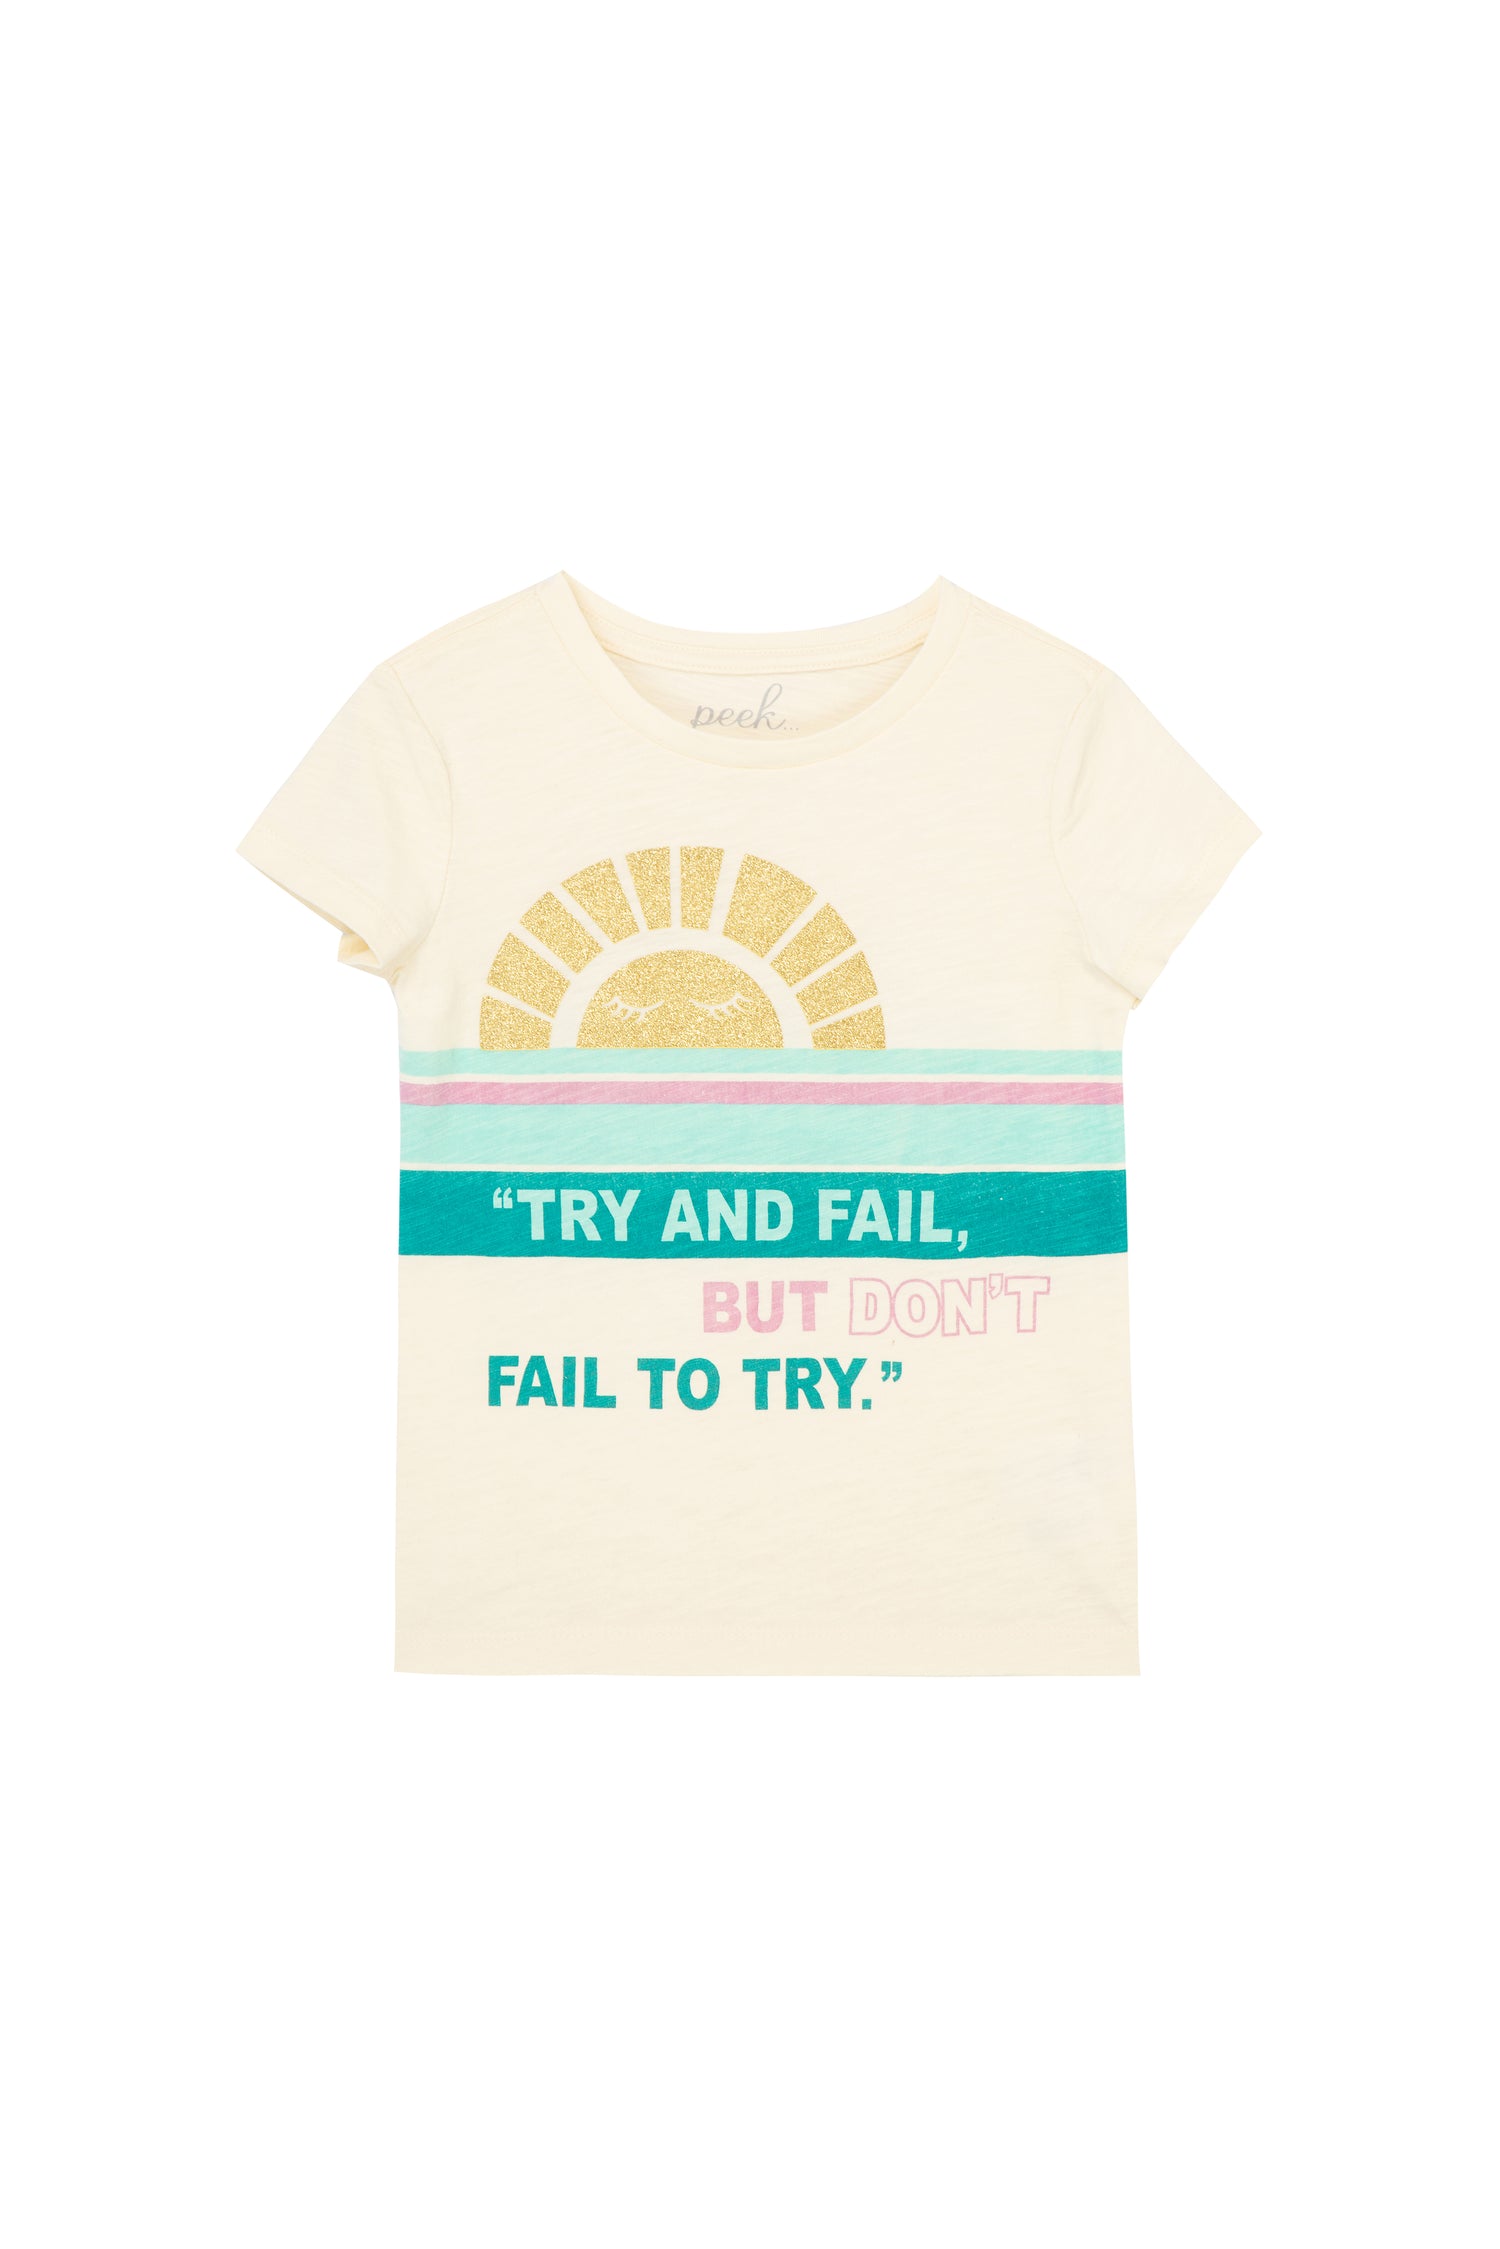 PALE YELLOW T-SHIRT WITH GREEN STRIPES ACROSS THE CENTER, A SUN GRAPHIC AND THE WORDS, TRY AND FAIL BUT DON'T FAIL TO TRY